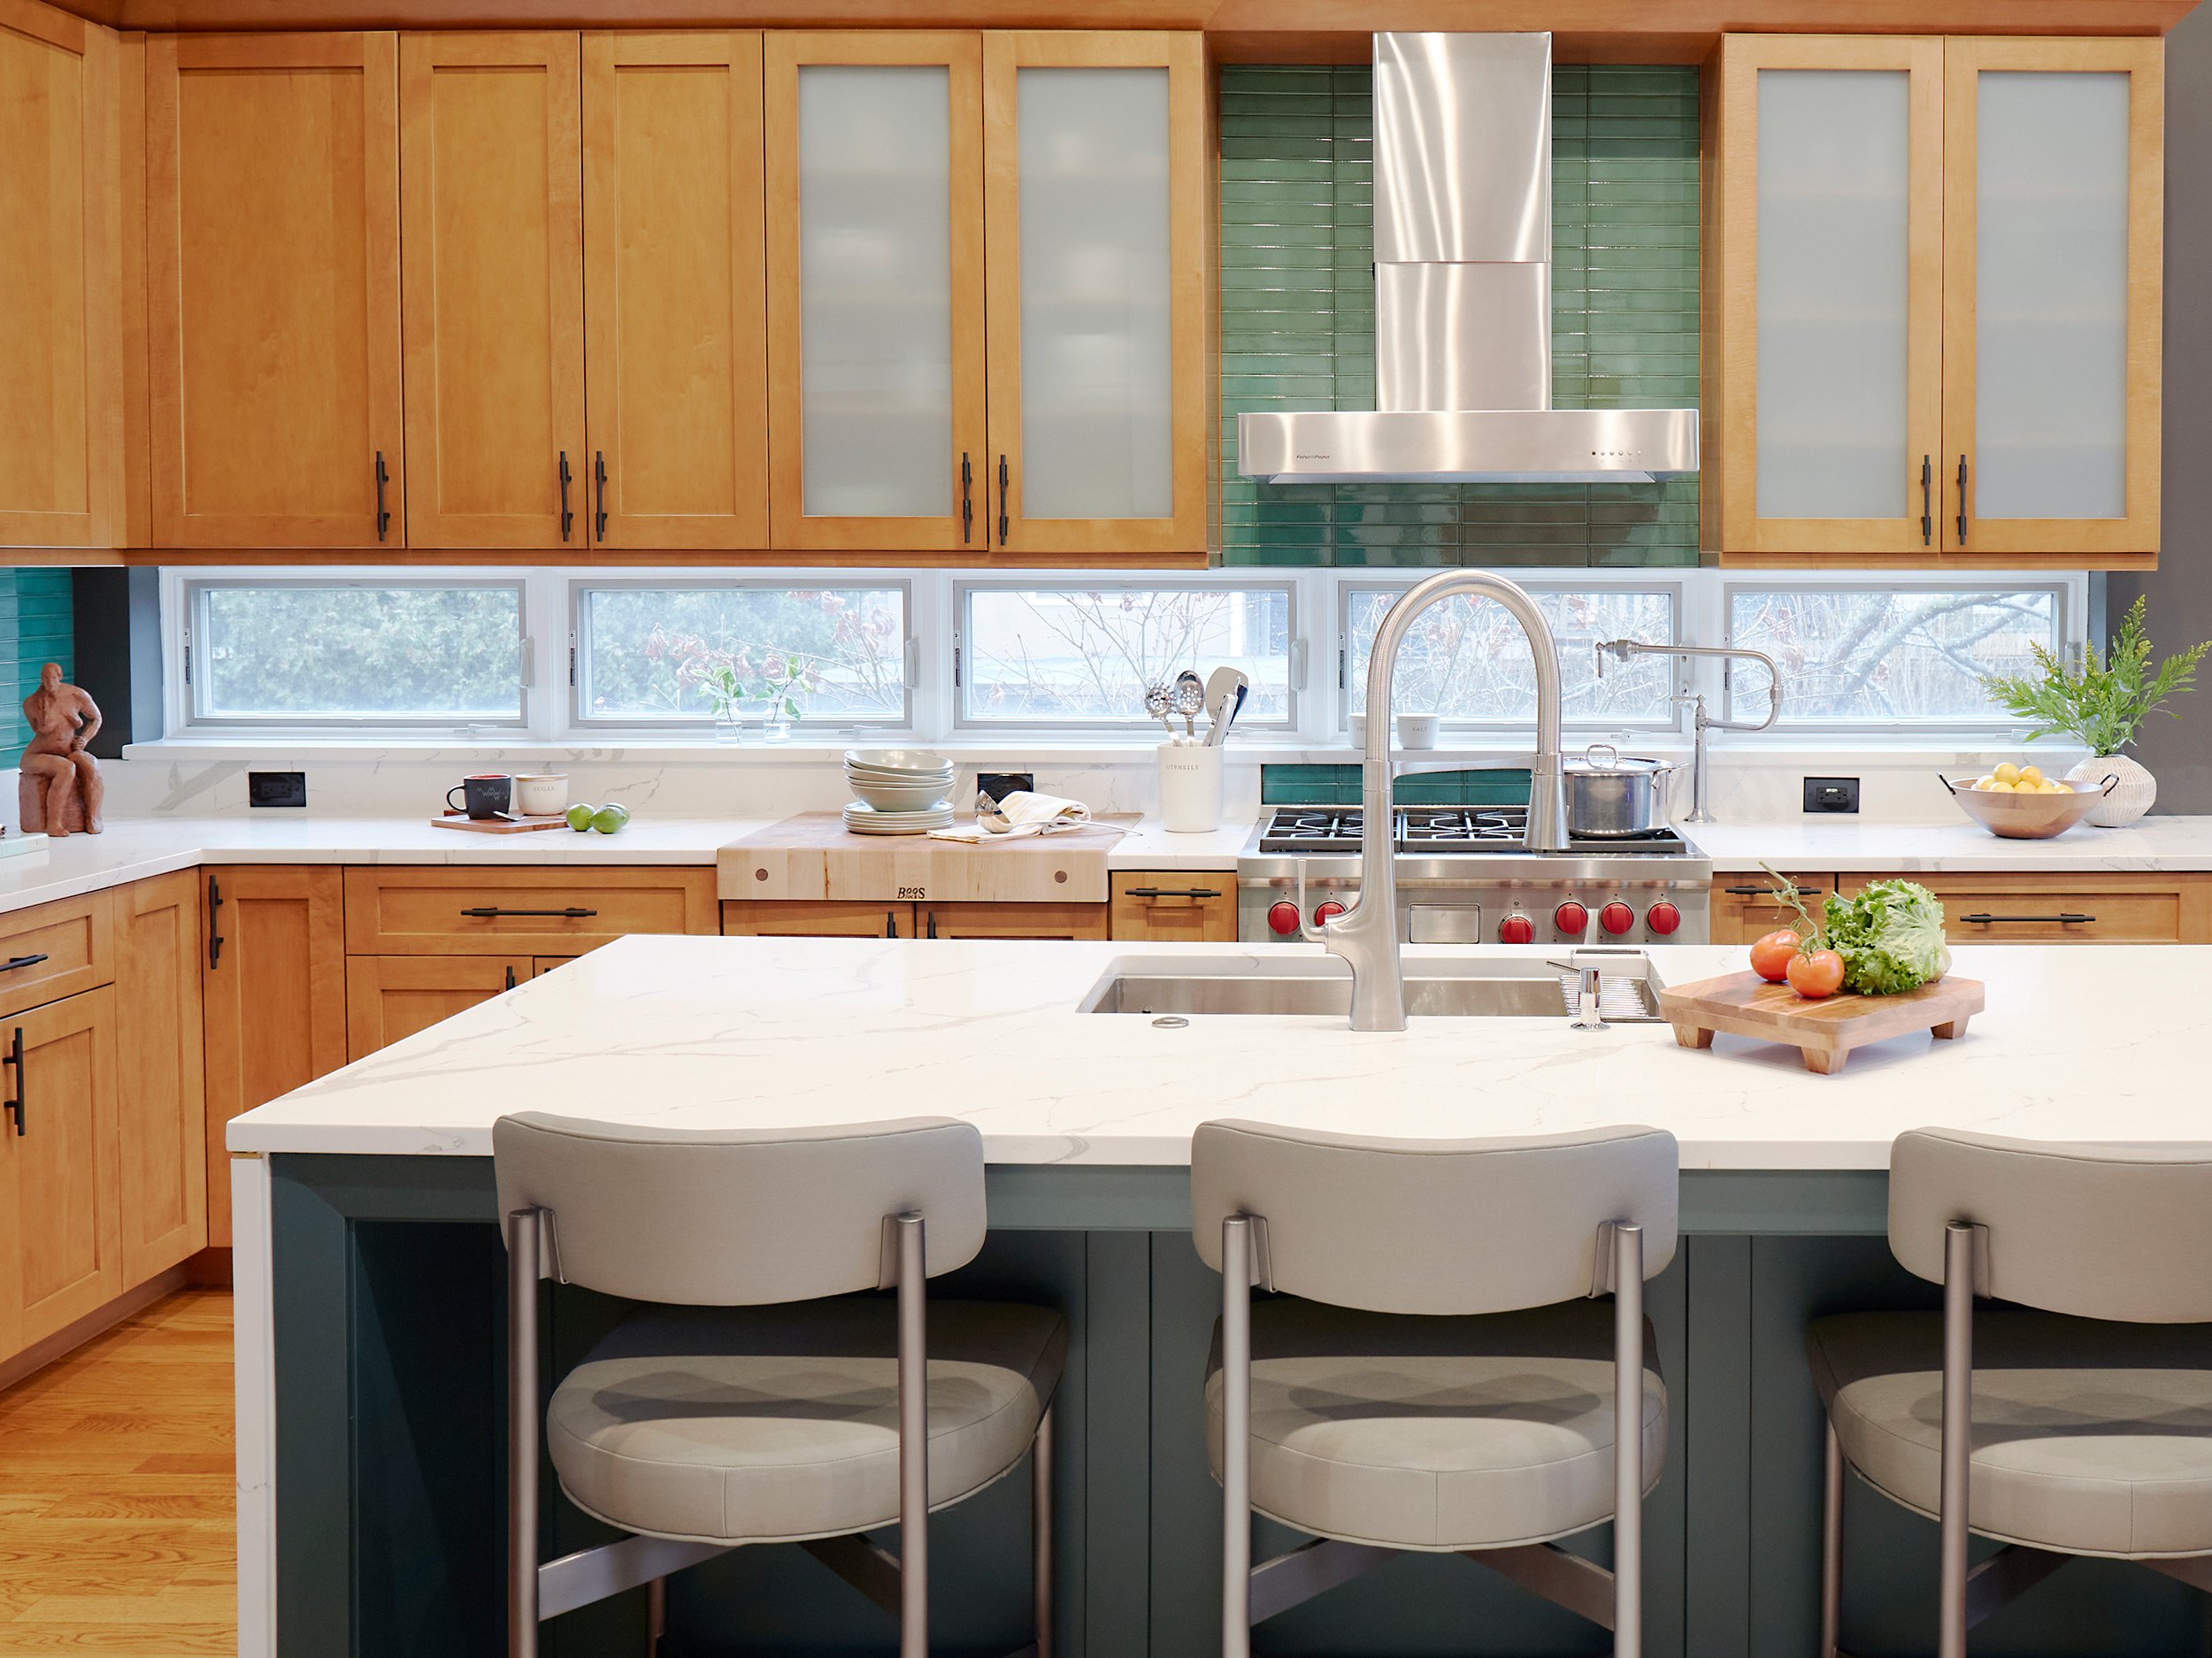 EpicInteriors_3034_N_Honore_KitchenView_1-copy.jpg